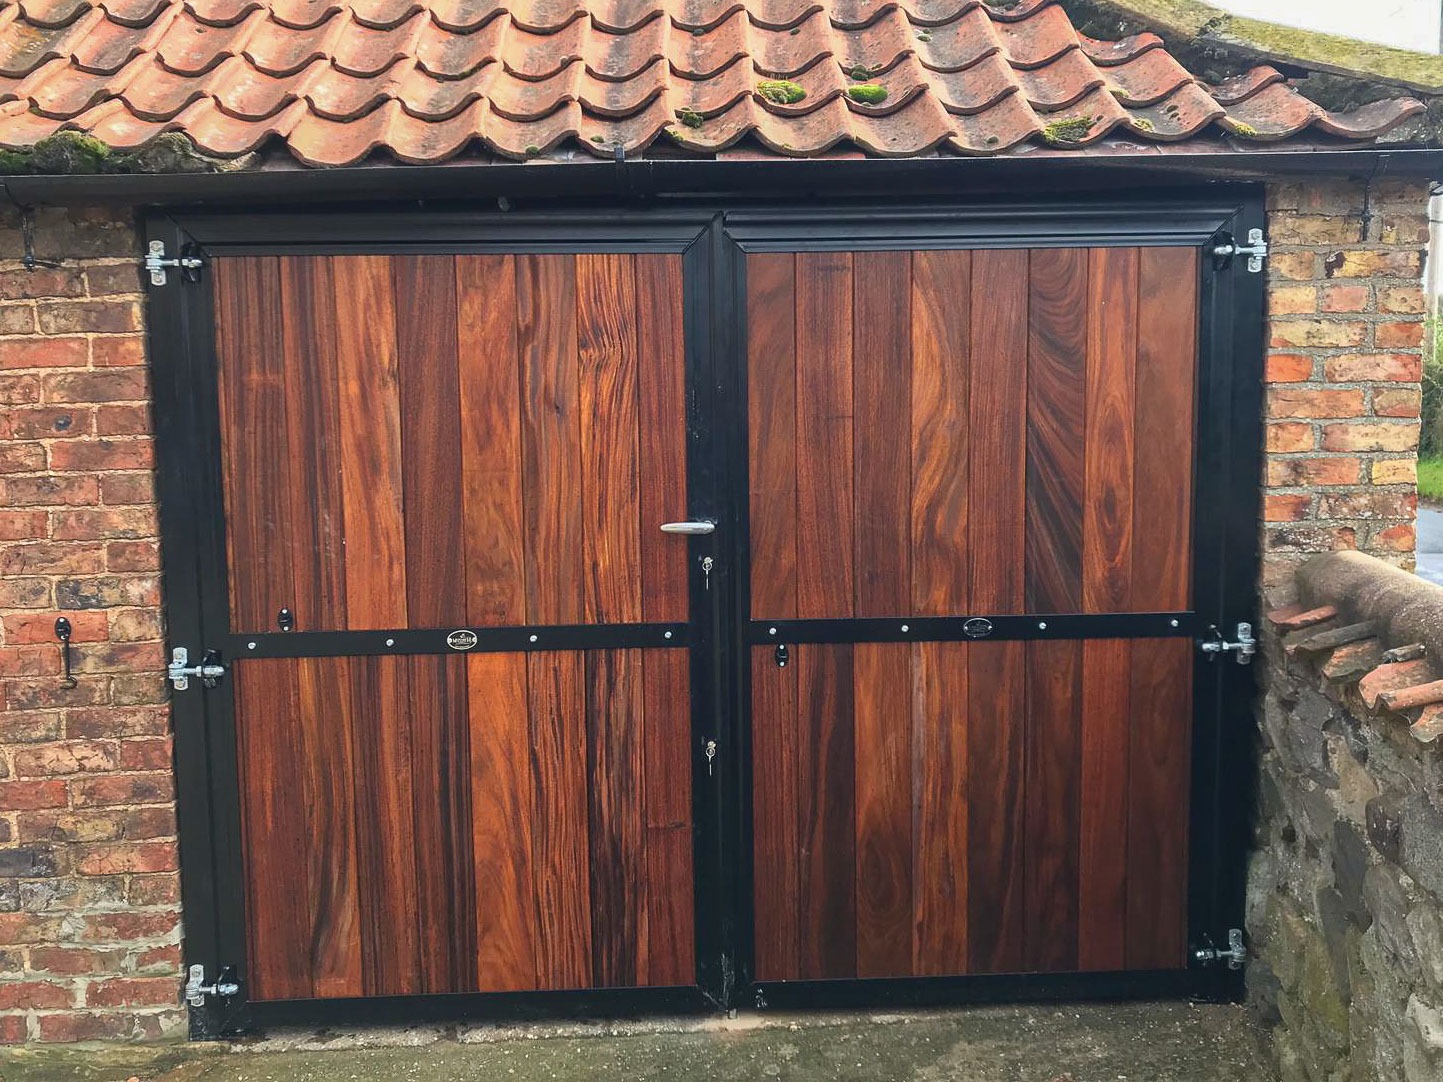 Pair of fully boarded doors with hardwood - powder coated